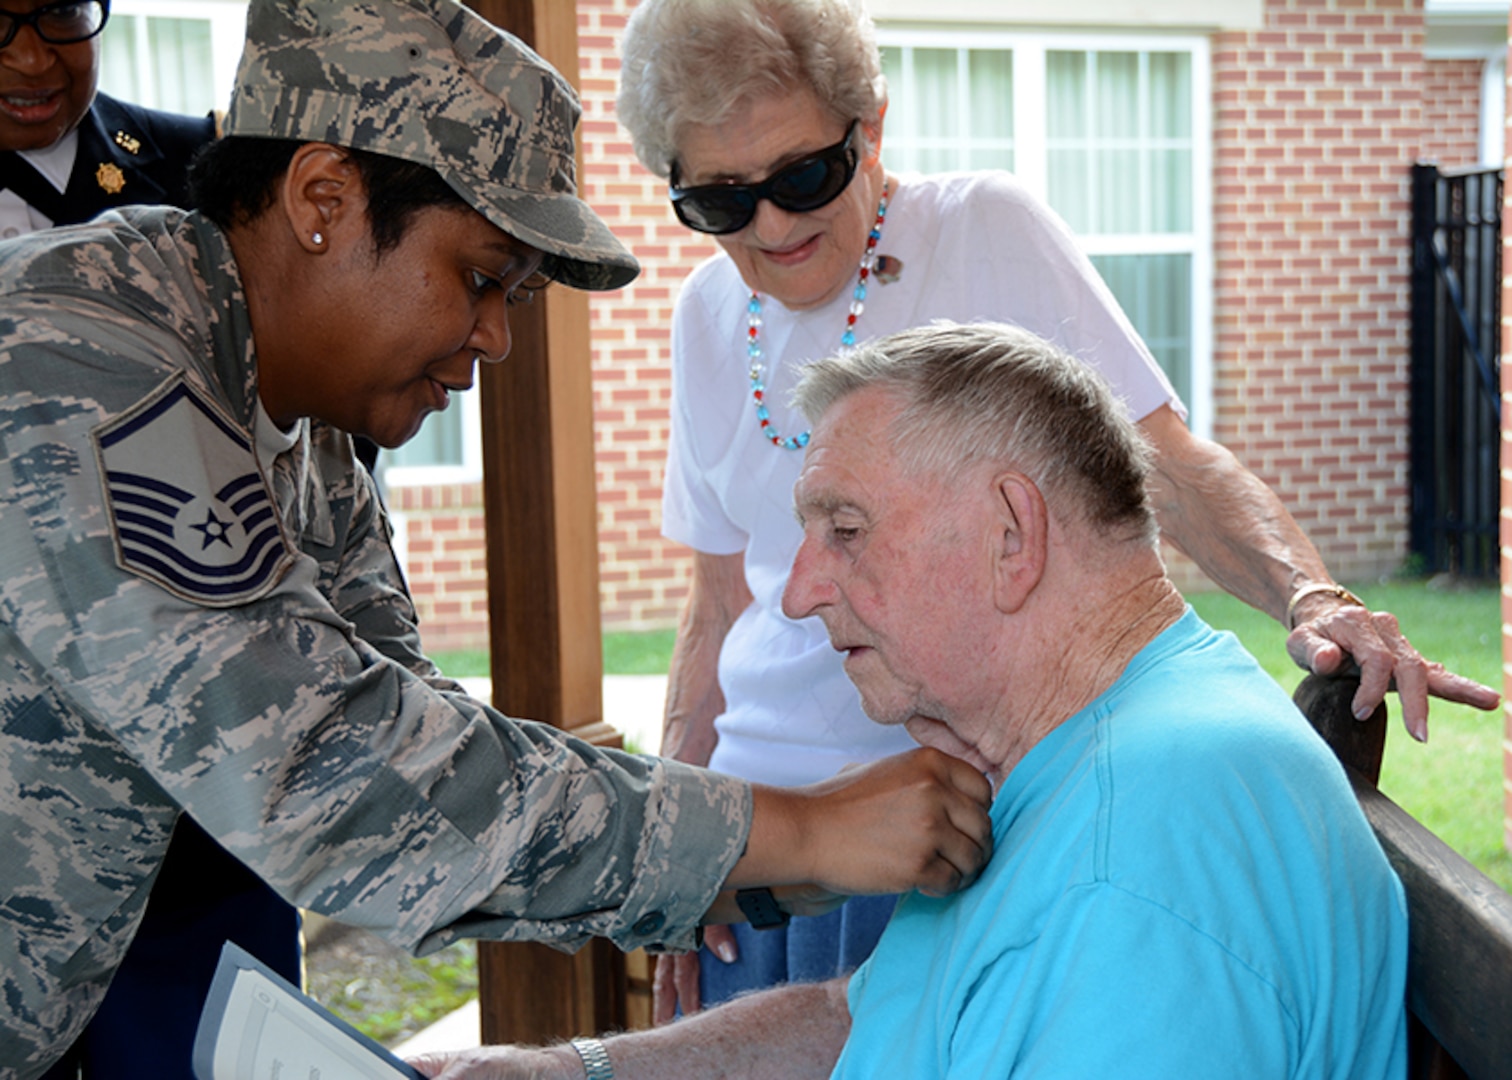 Air Force Master Sgt. Nikki Broomfield, military human resources specialist, Resource Management Division, Command Support Directorate, DLA Aviation, attaches a pin to Henry Pleasants, a World War II veteran who suffers from Alzheimer’s, after an Independence Day ceremony to honor veterans at the Dunlop Home assisted living facility, in Colonial Heights, Virginia July 6, 2017.